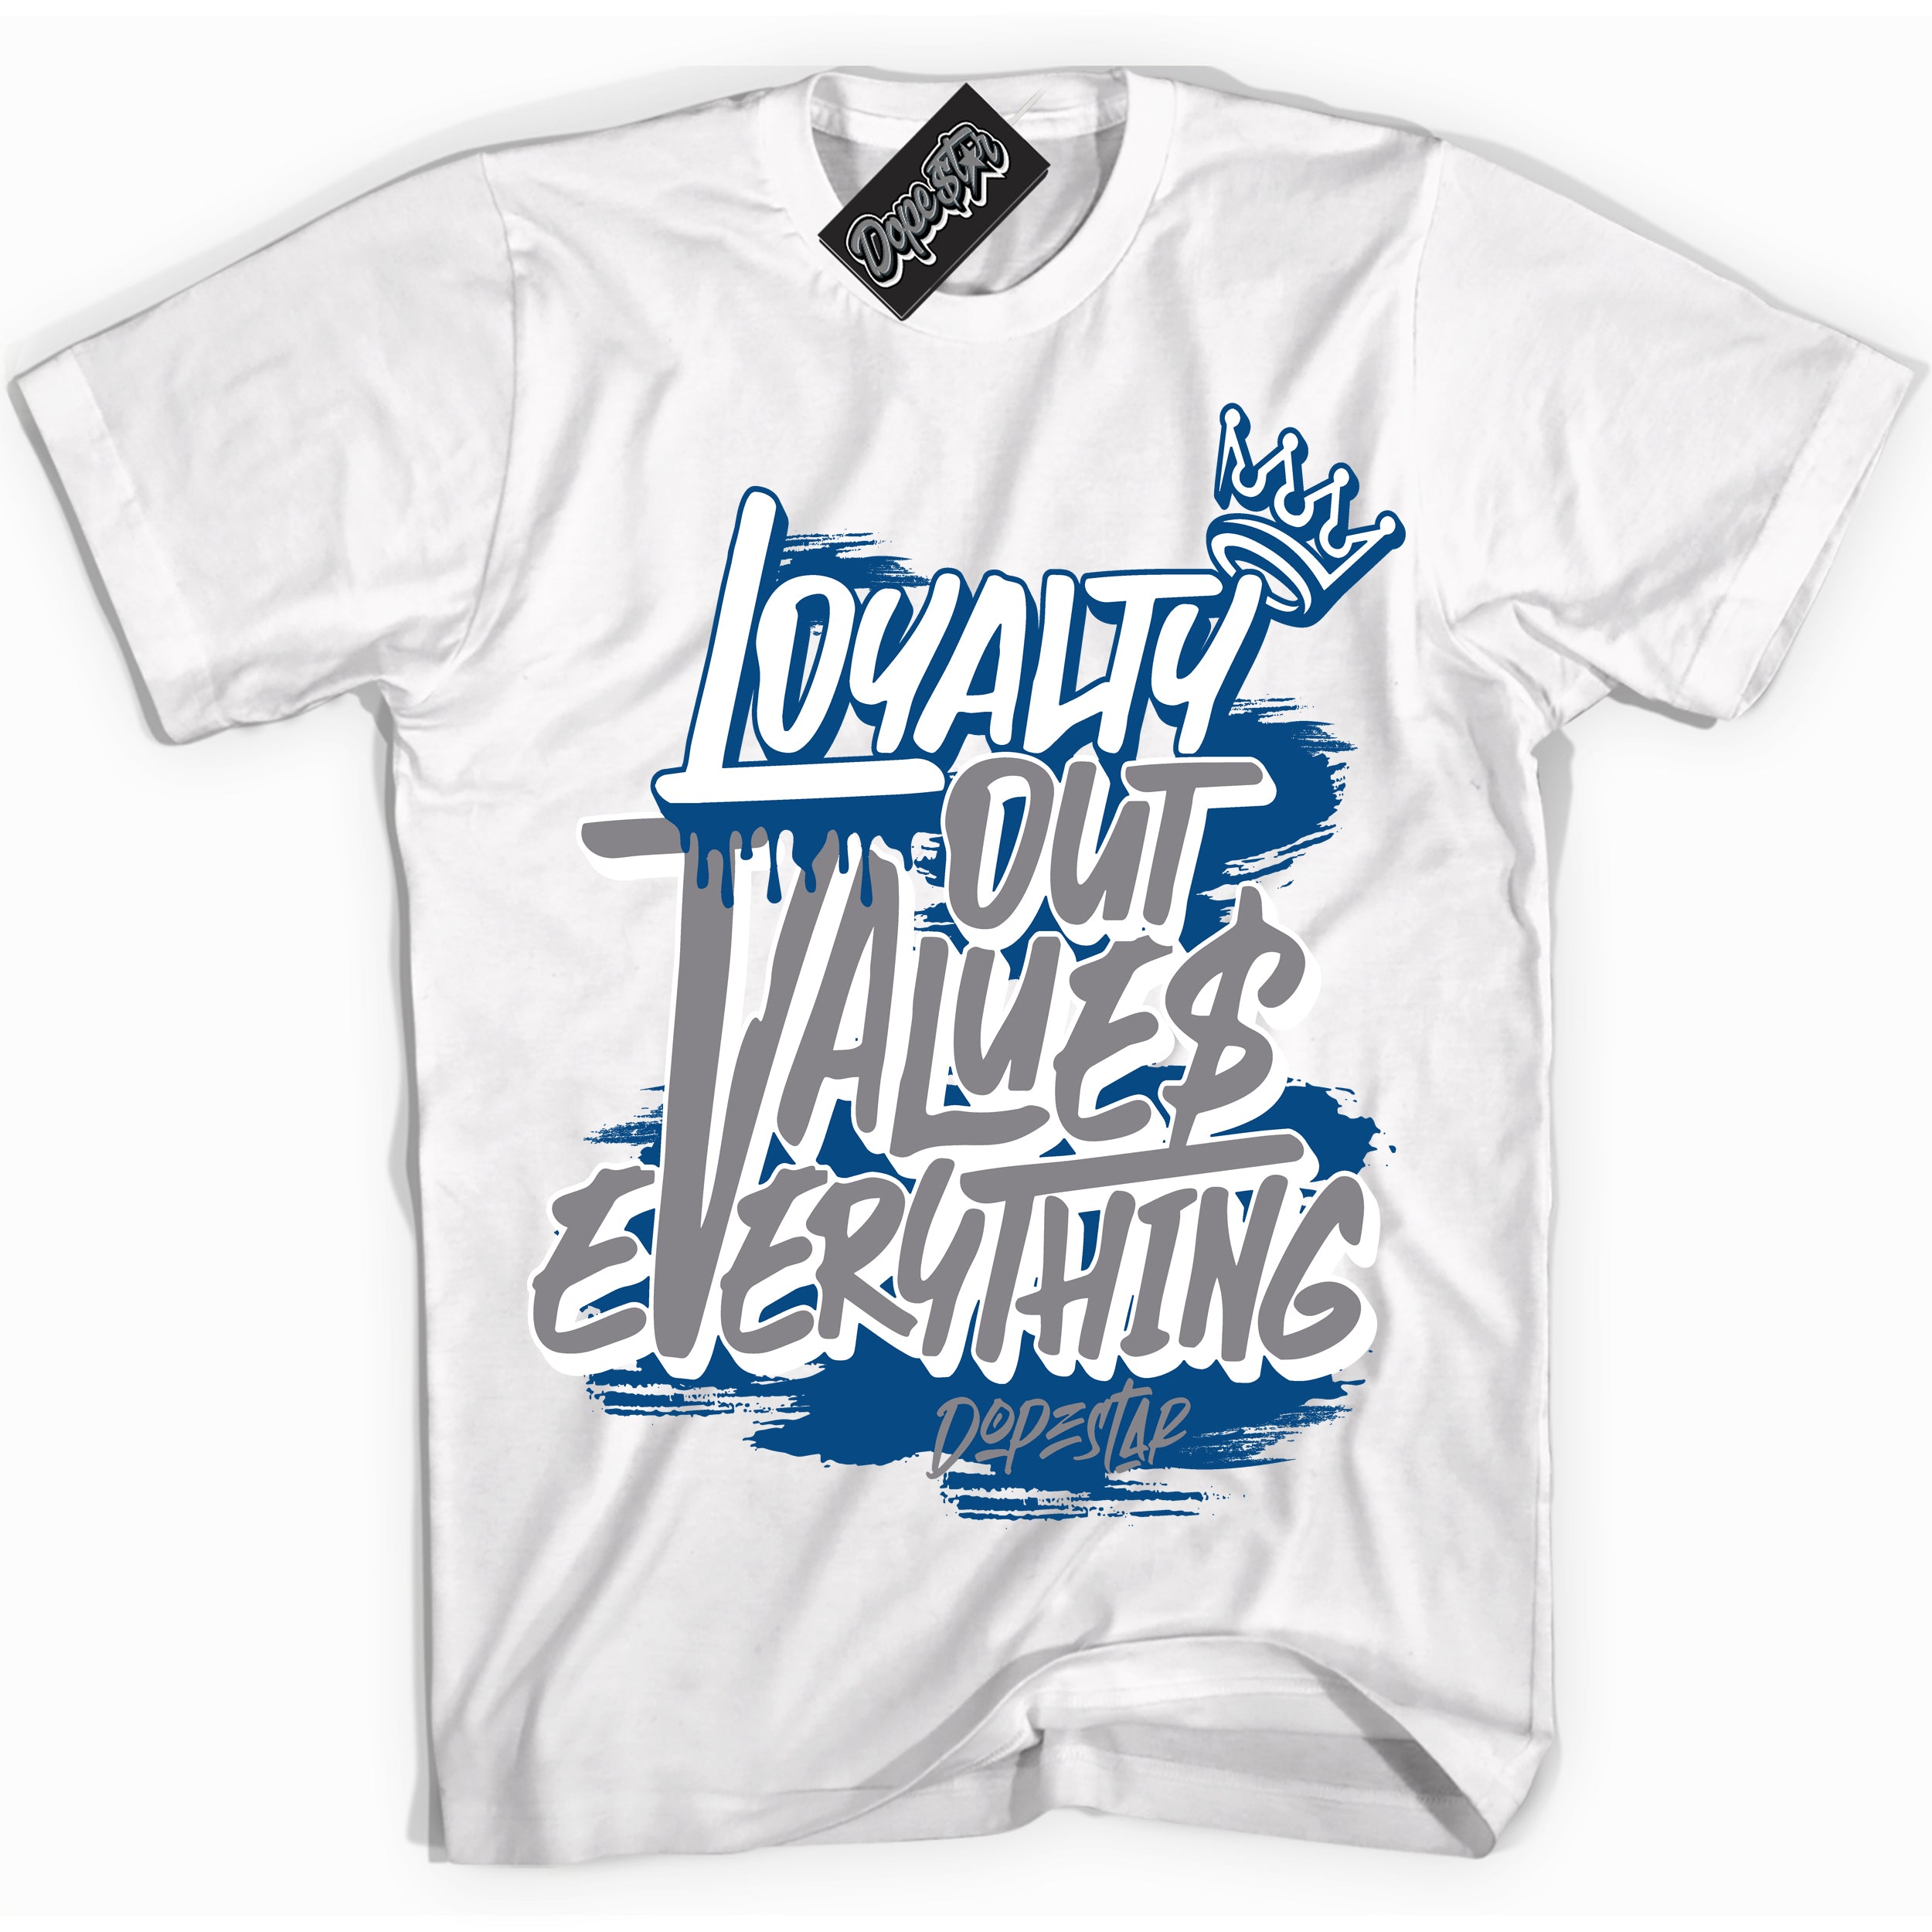 Cool White Shirt with “ Loyalty Out Values Everything” design that perfectly matches Low True Blue 1s Sneakers.